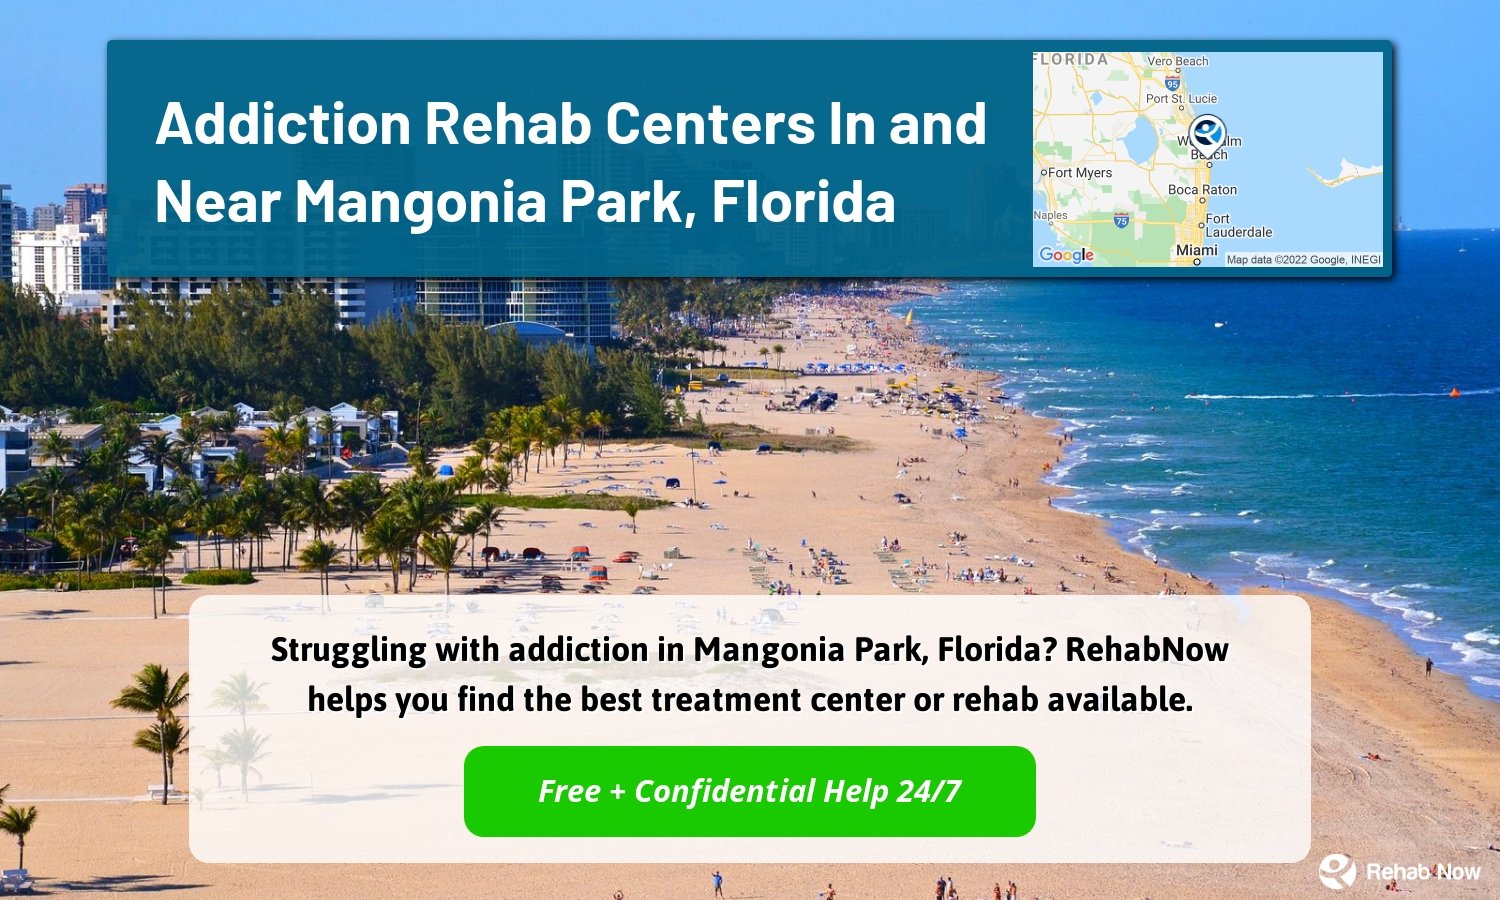 Struggling with addiction in Mangonia Park, Florida? RehabNow helps you find the best treatment center or rehab available.